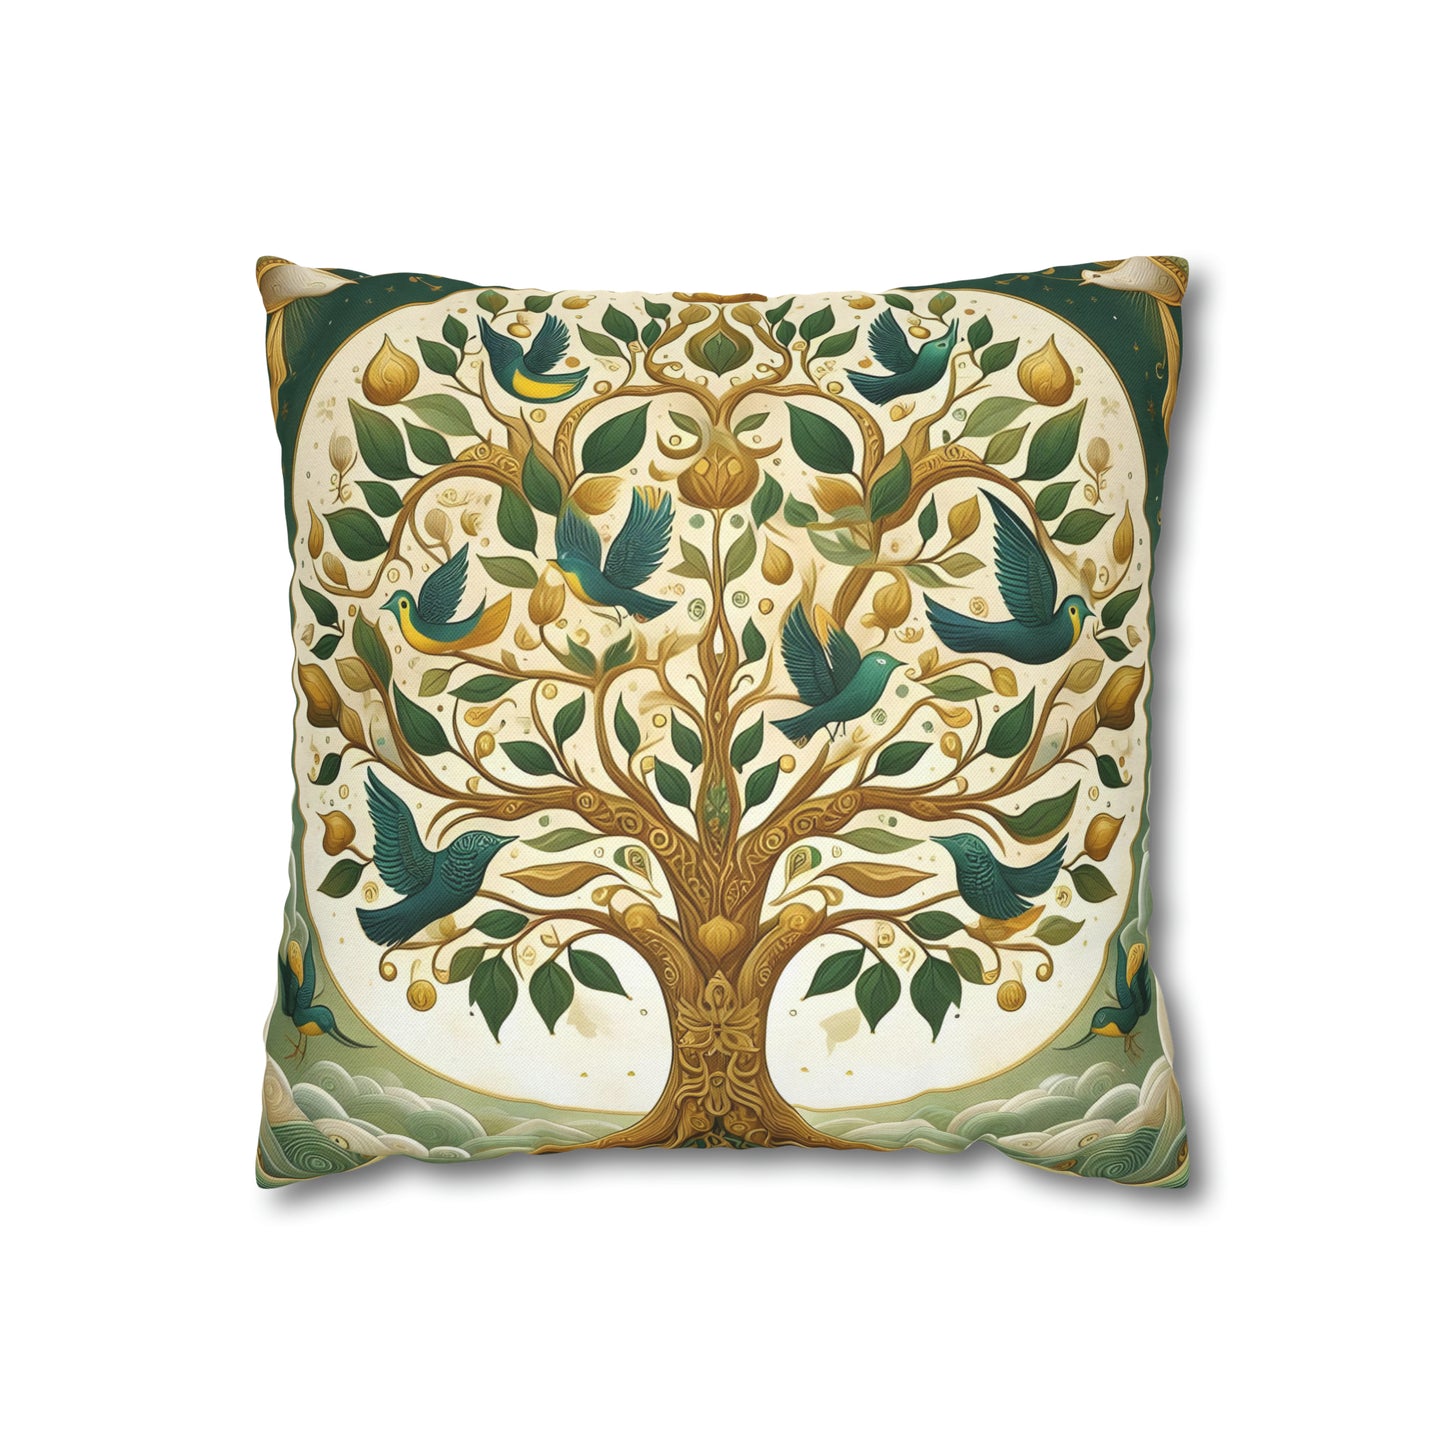 Beatuful Tree of Life Decorative Pillow Cover